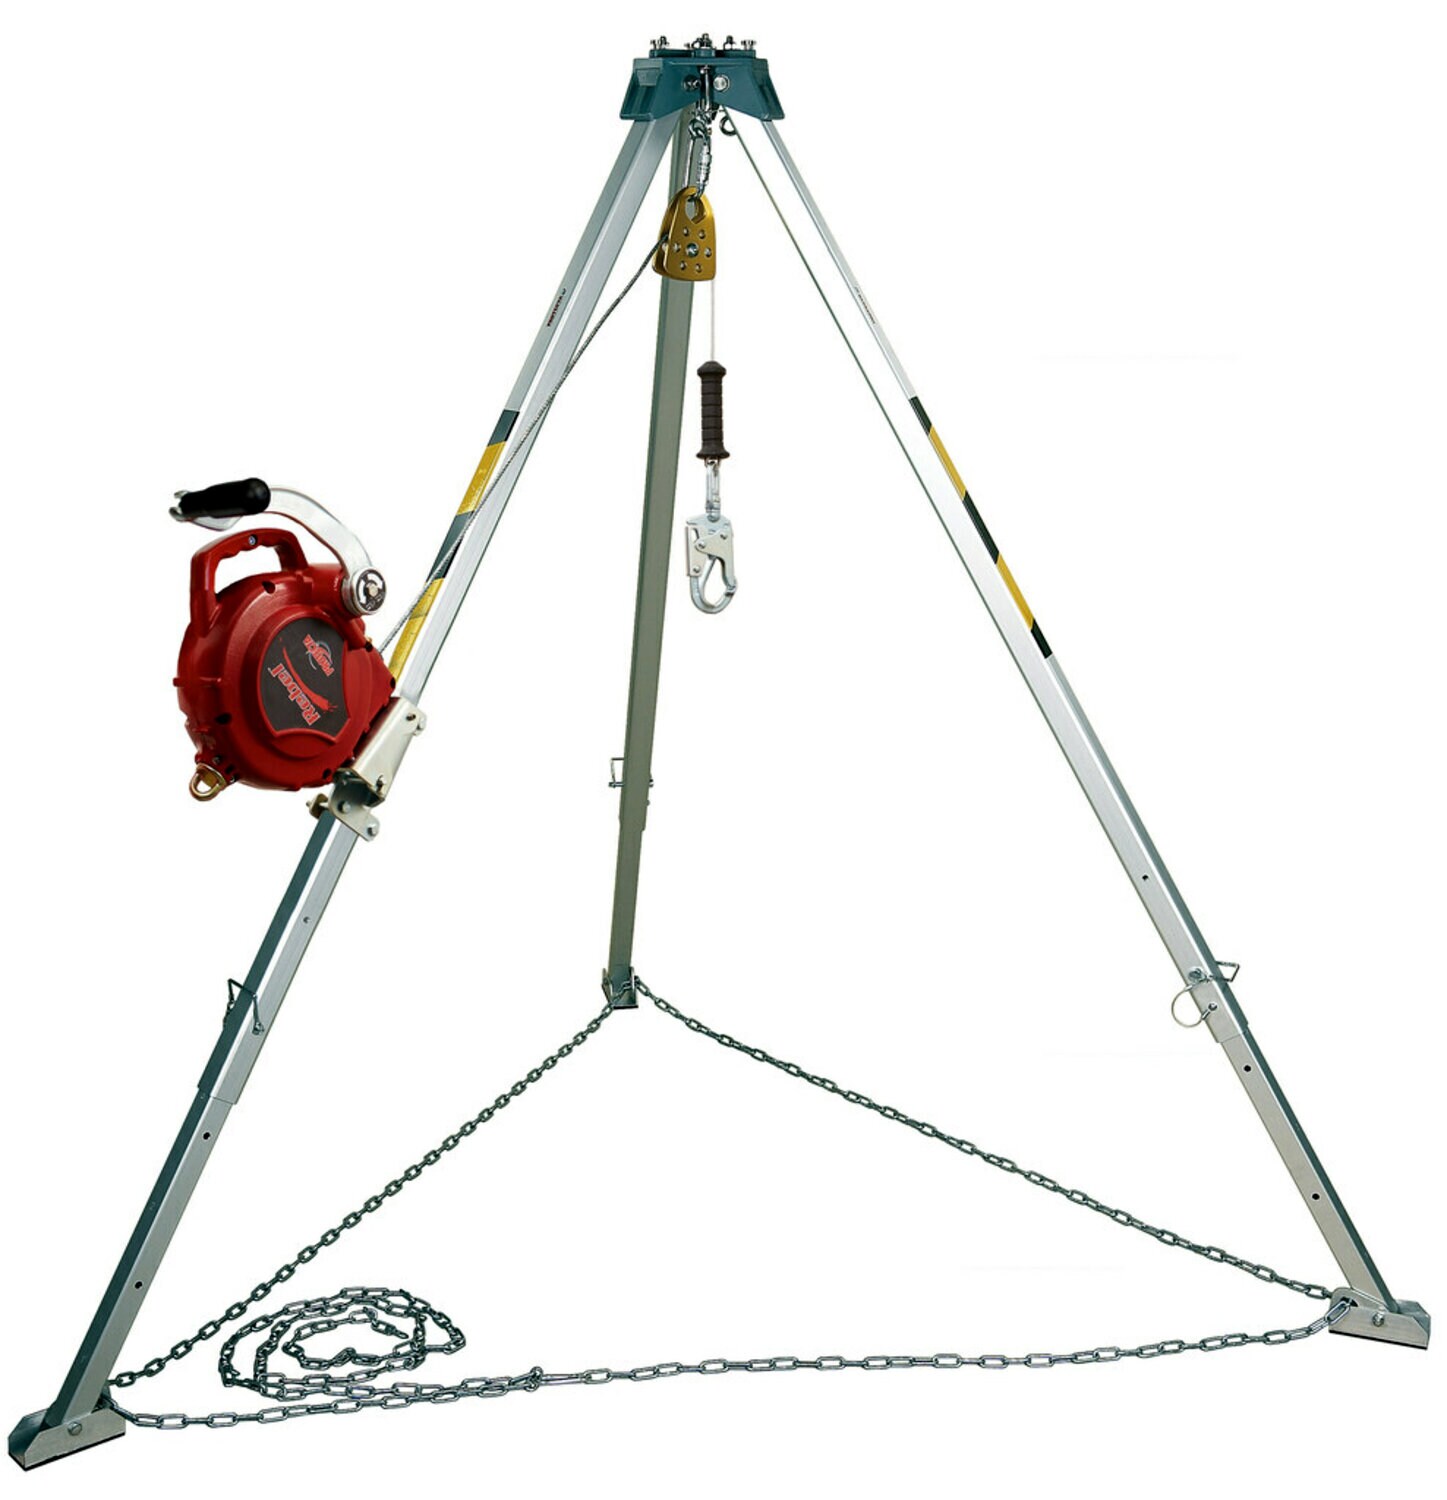 7012820492 - 3M Protecta Confined Space Aluminum Tripod with 3-Way SRL 8308006, 8 ft High, 50 ft Stainless Steel Cable